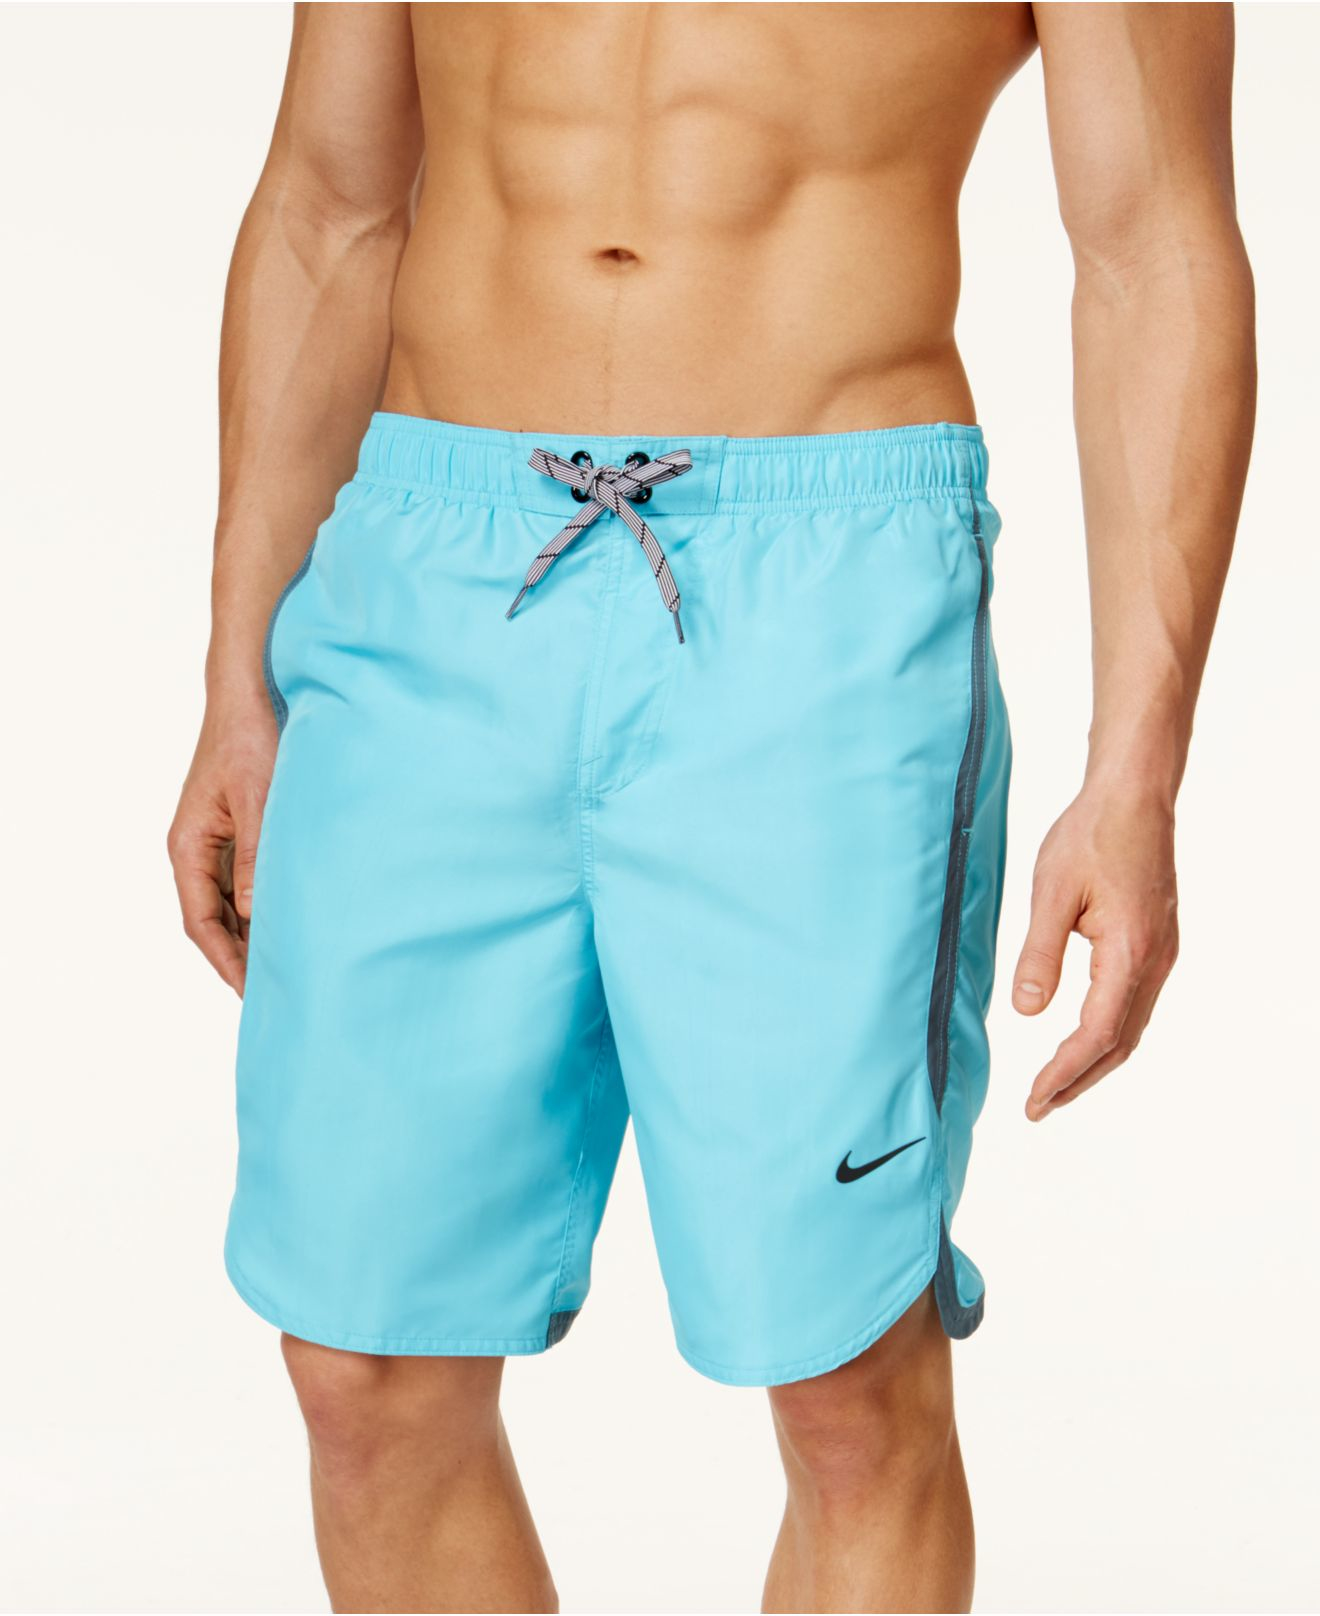 Lyst - Nike Performance Quick Dry Solid Swim Trunks in Blue for Men